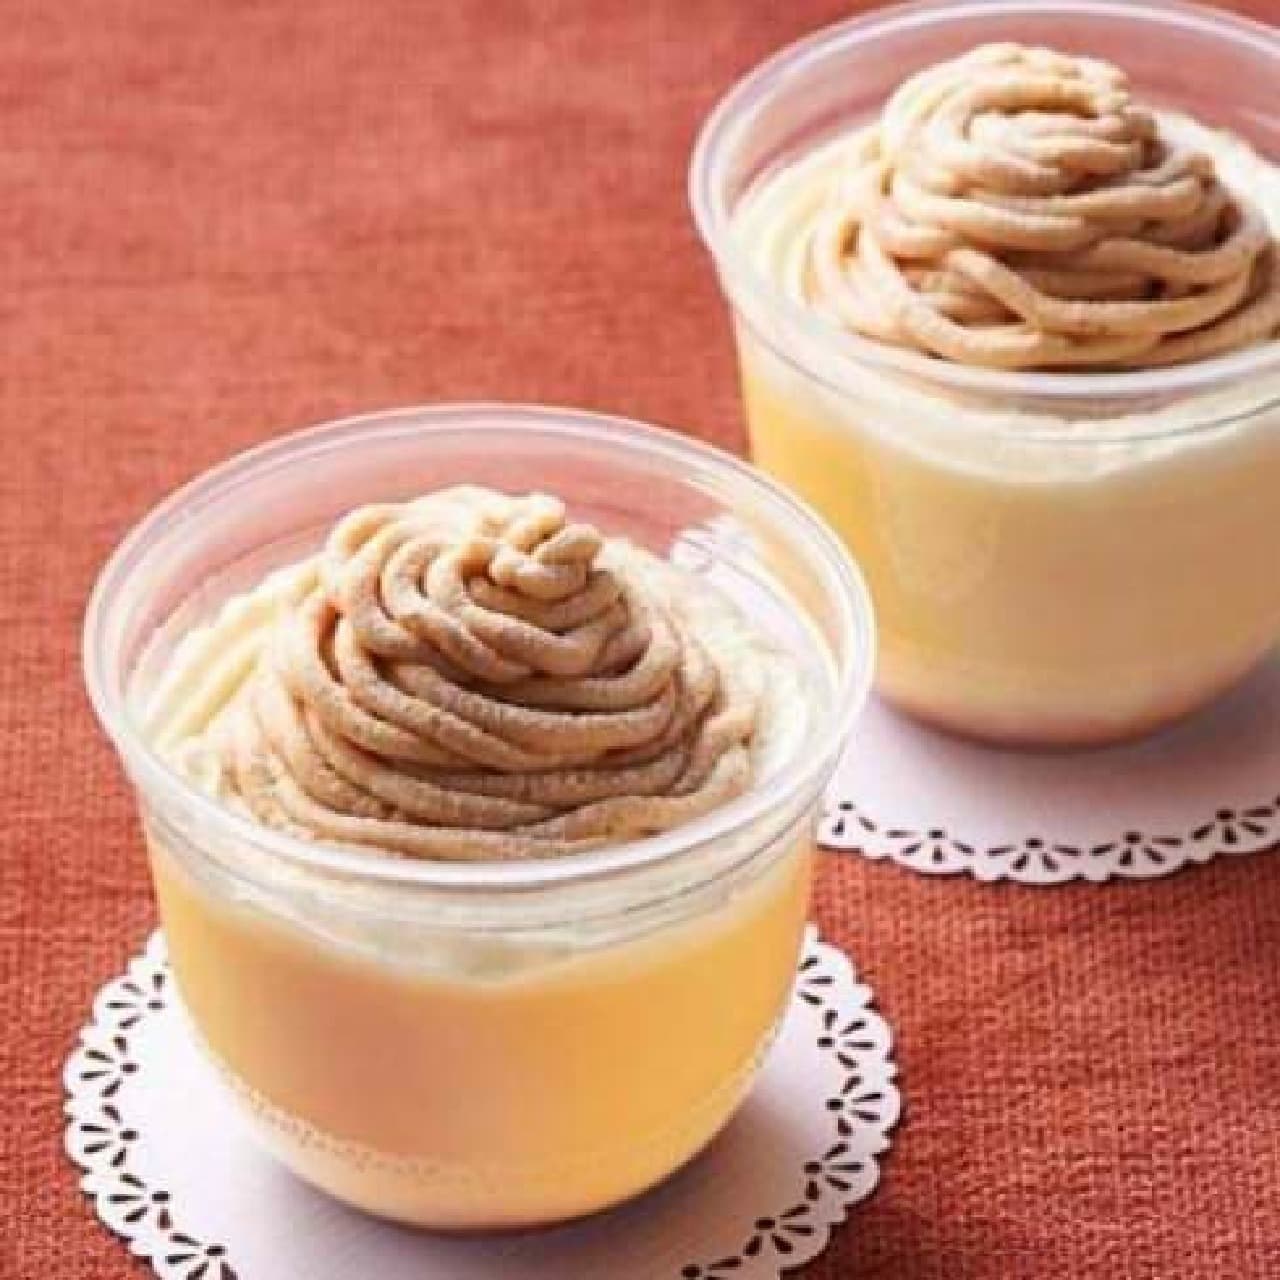 7-ELEVEN's new work "rich Montblanc pudding"